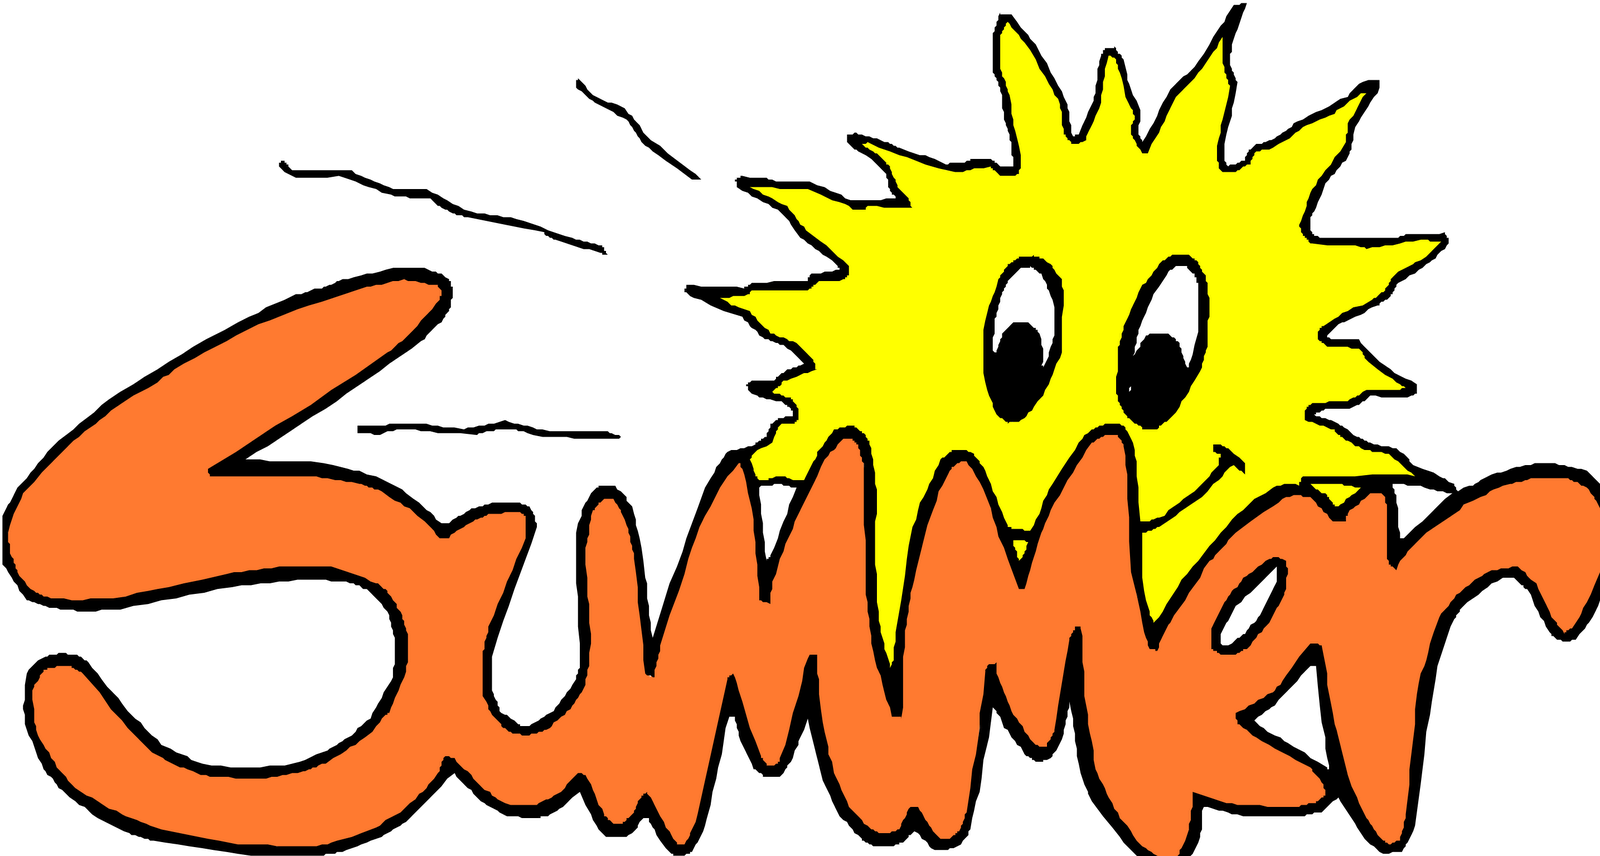 free clipart of summer activities - photo #22